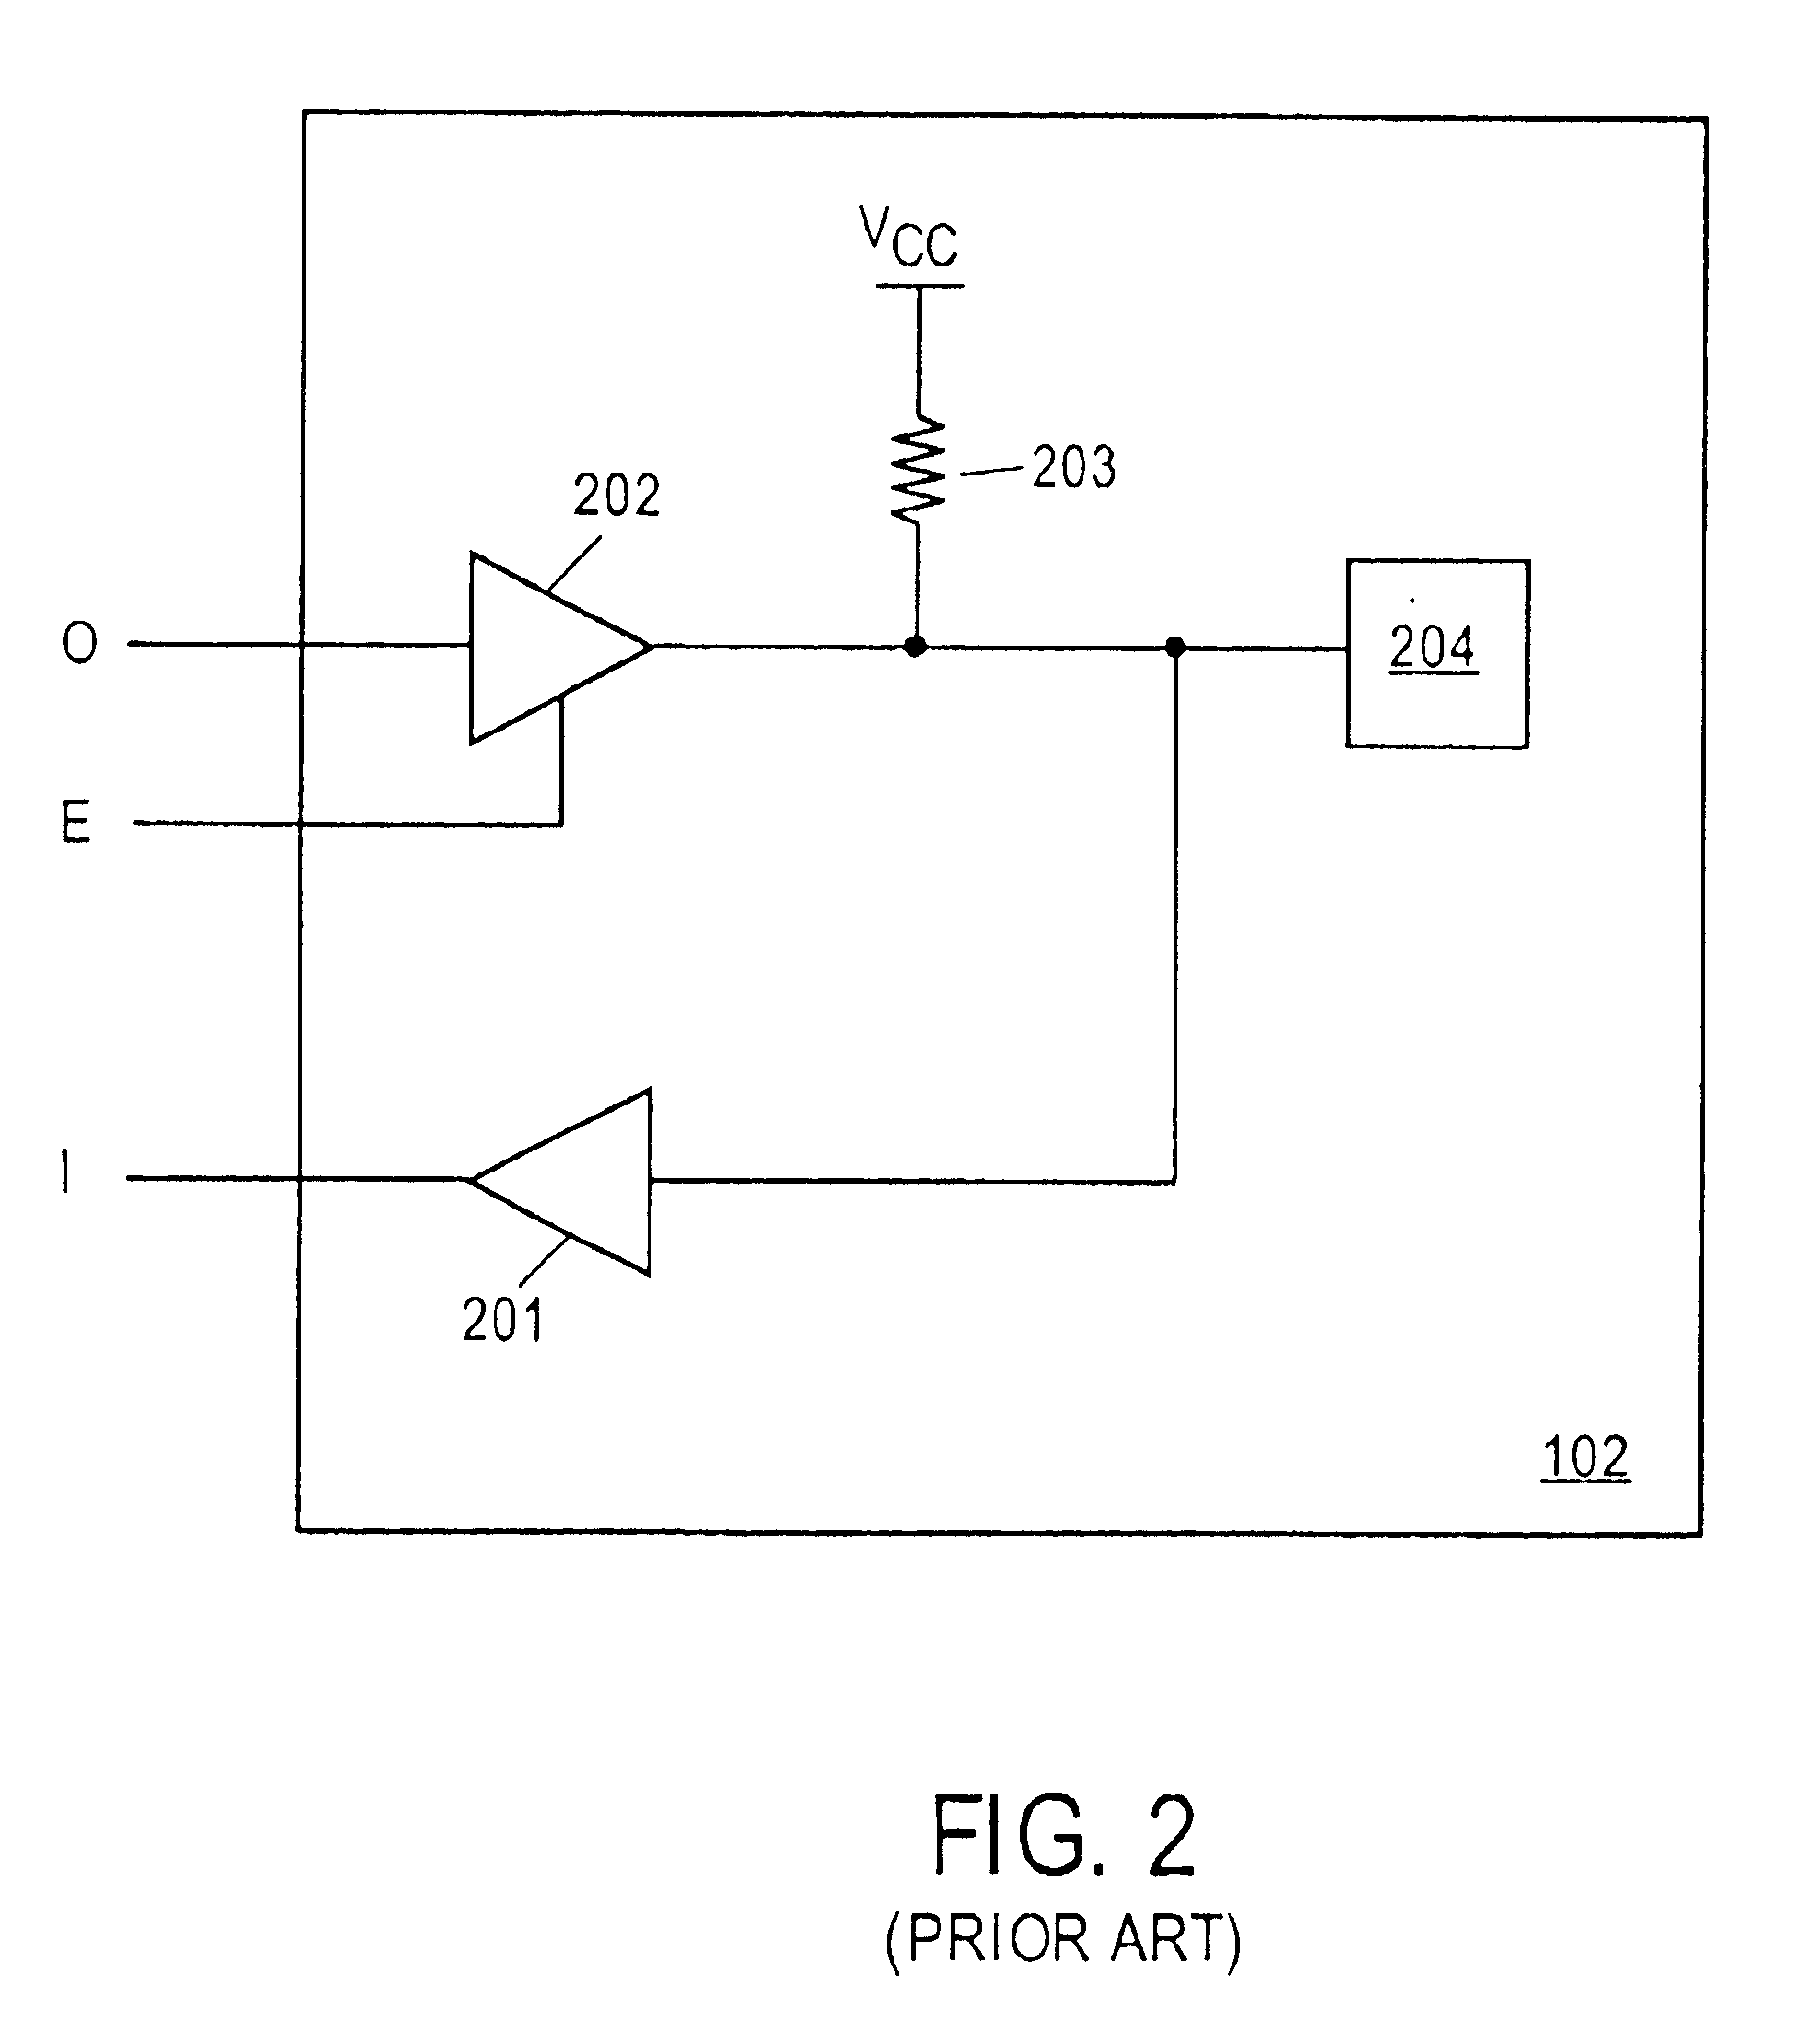 Input/output circuit with user programmable functions